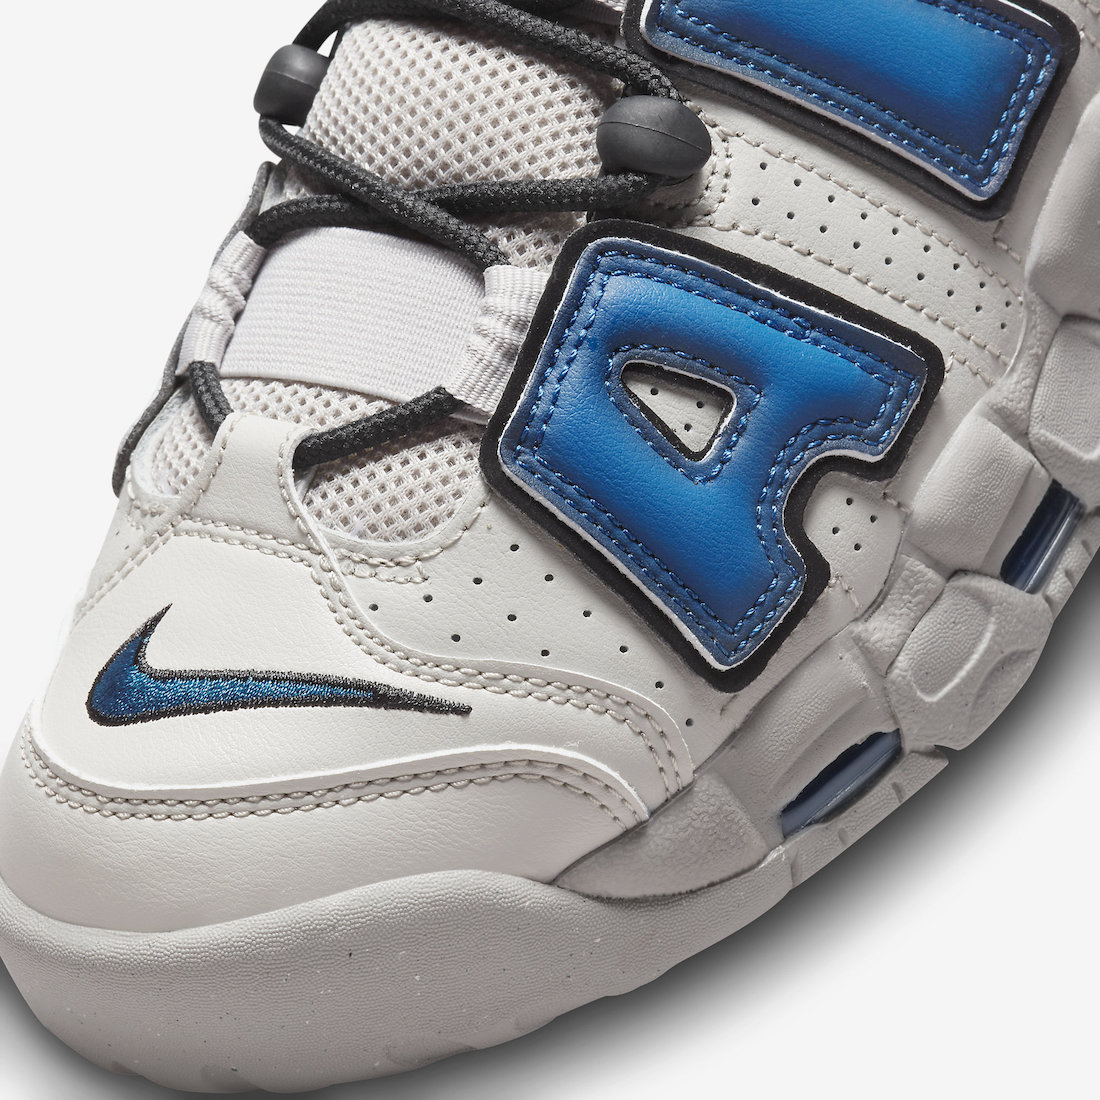 Nike-Air-More-Uptempo-Industrial-Blue-FD5573-001-6.jpeg